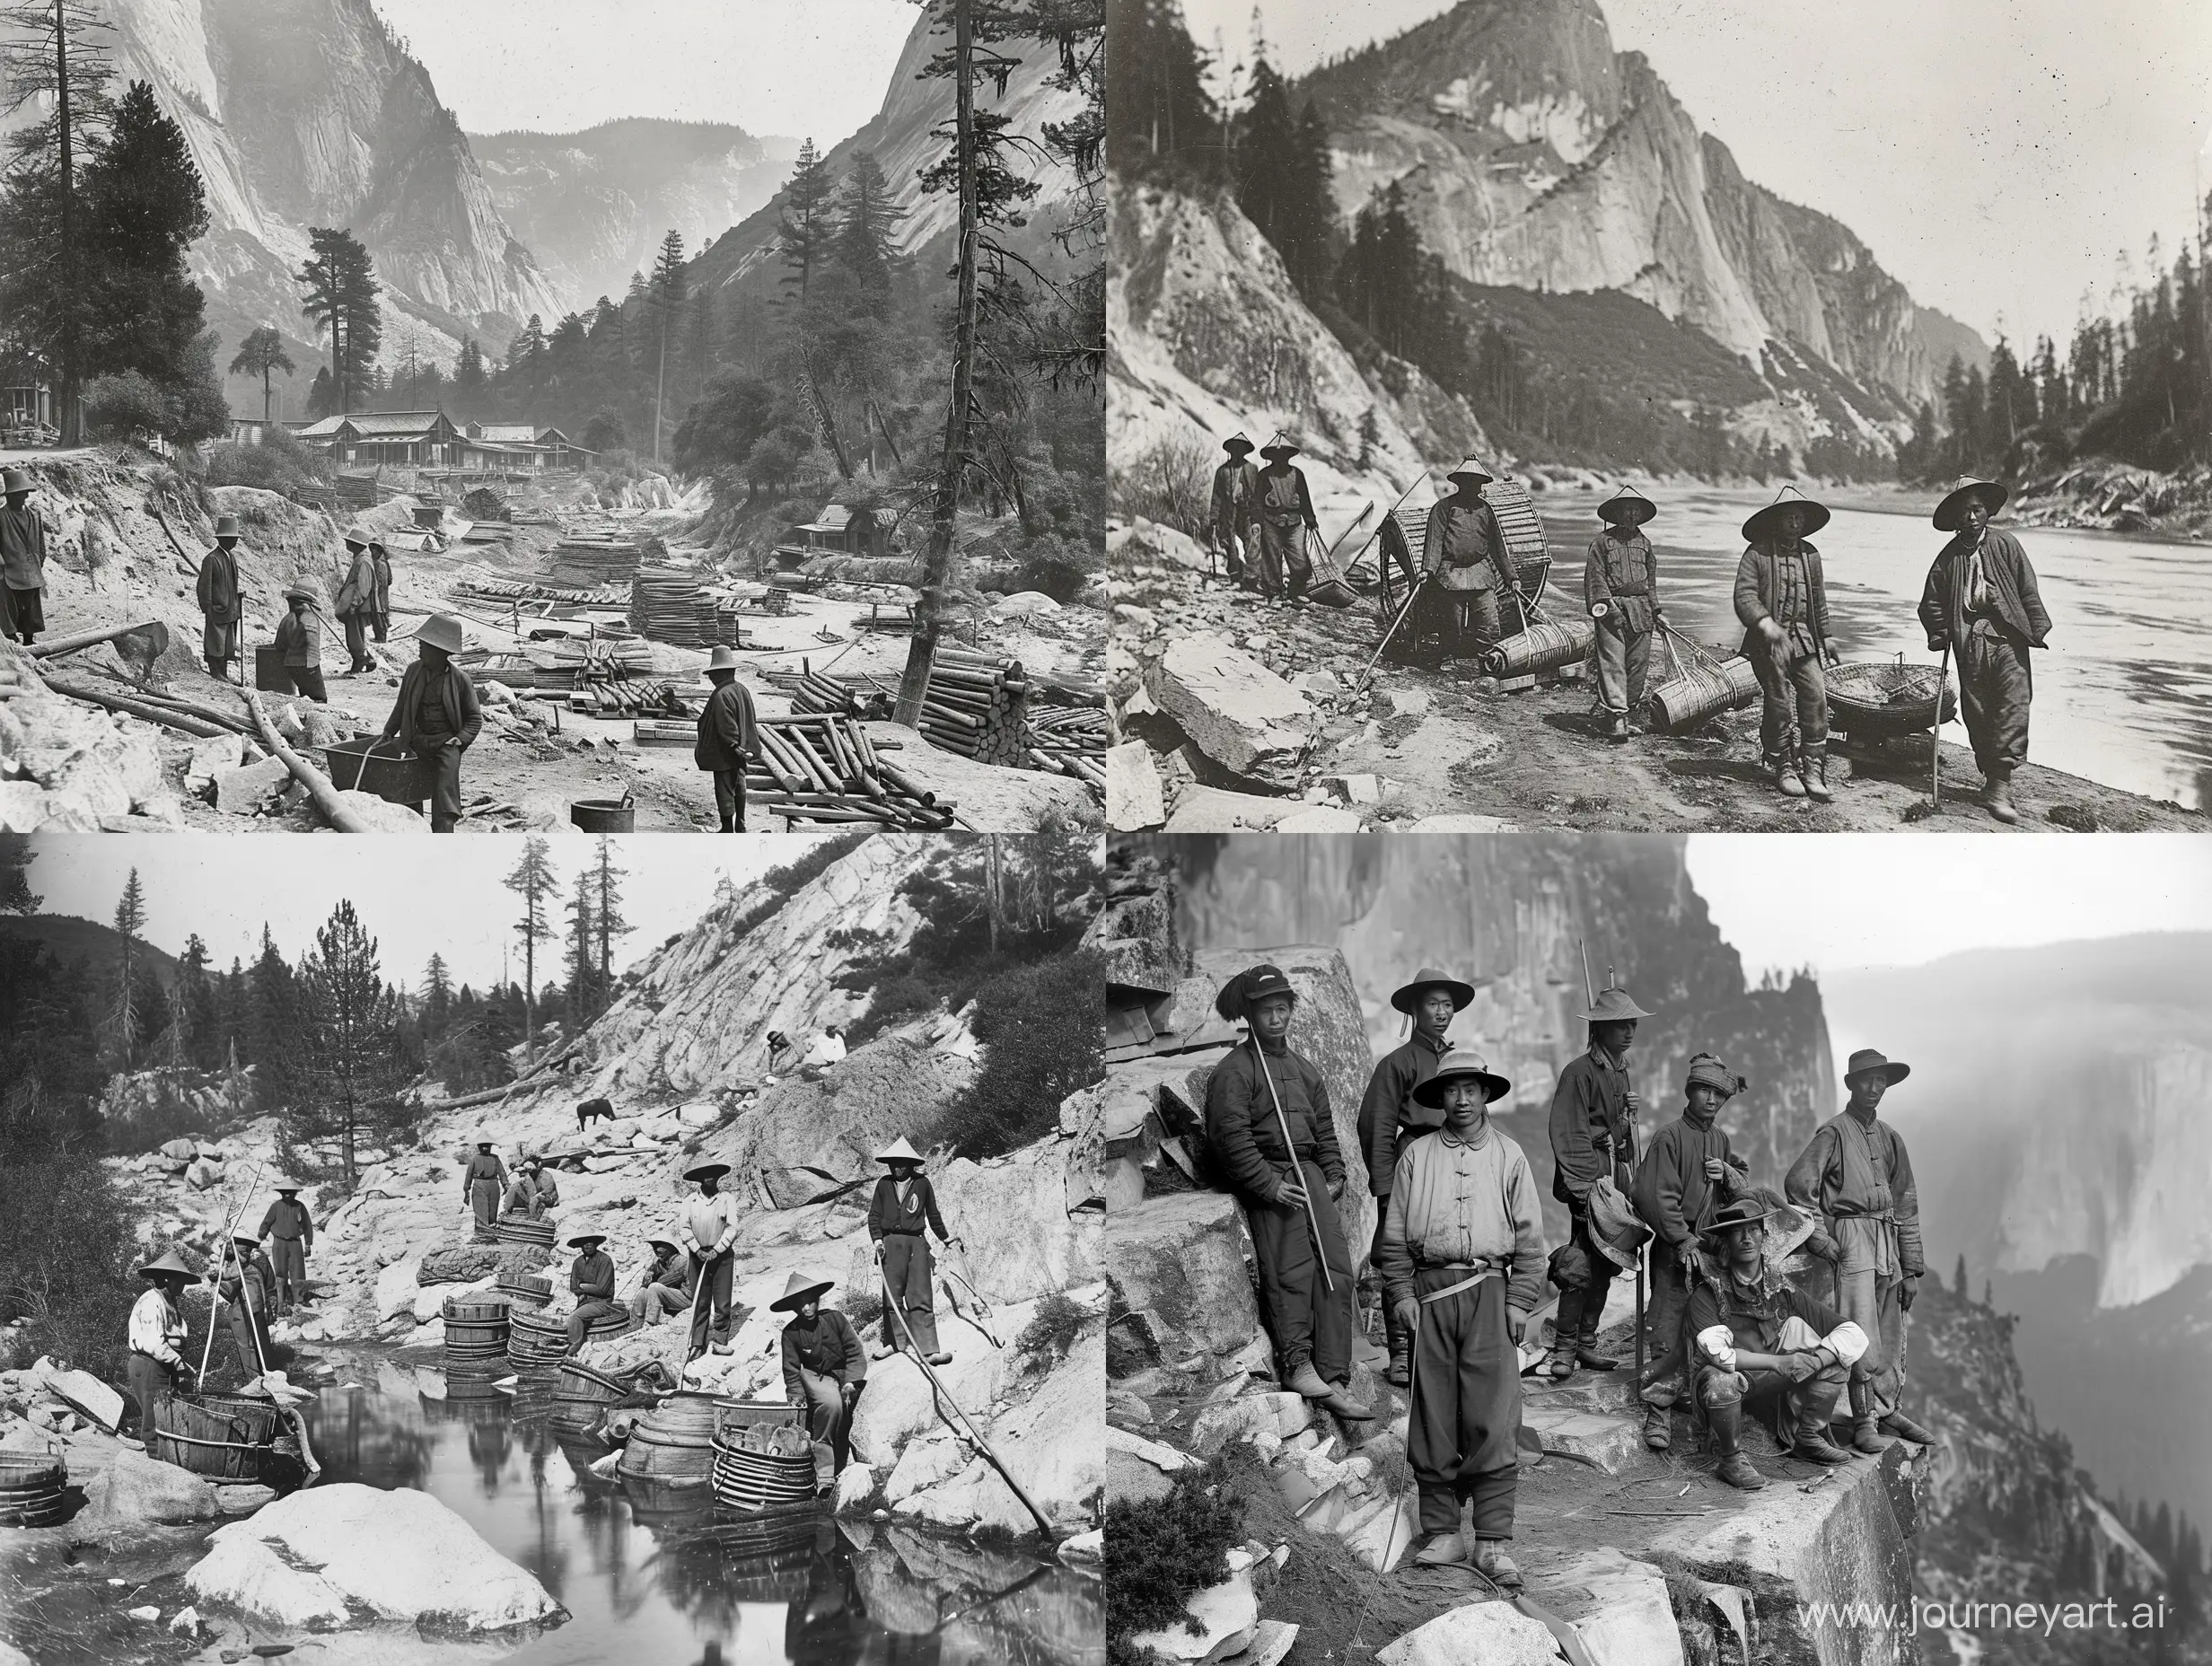 Chinese-Workers-at-Yosemite-in-Late-1800s-Historical-Black-and-White-Photographs